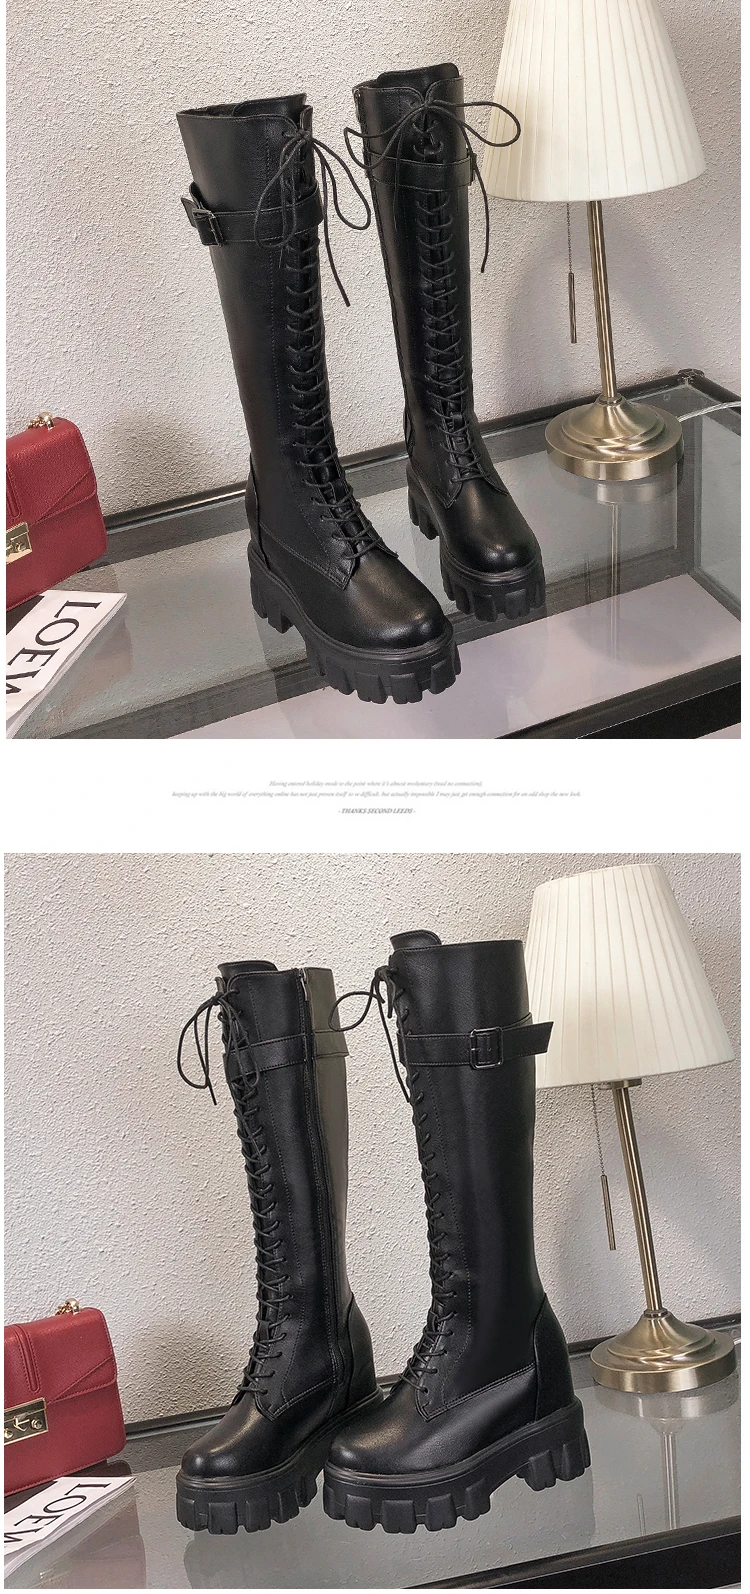 patent leather knee high boots fashion women's increased shoes winter warm lace-up long boots platform punk boots